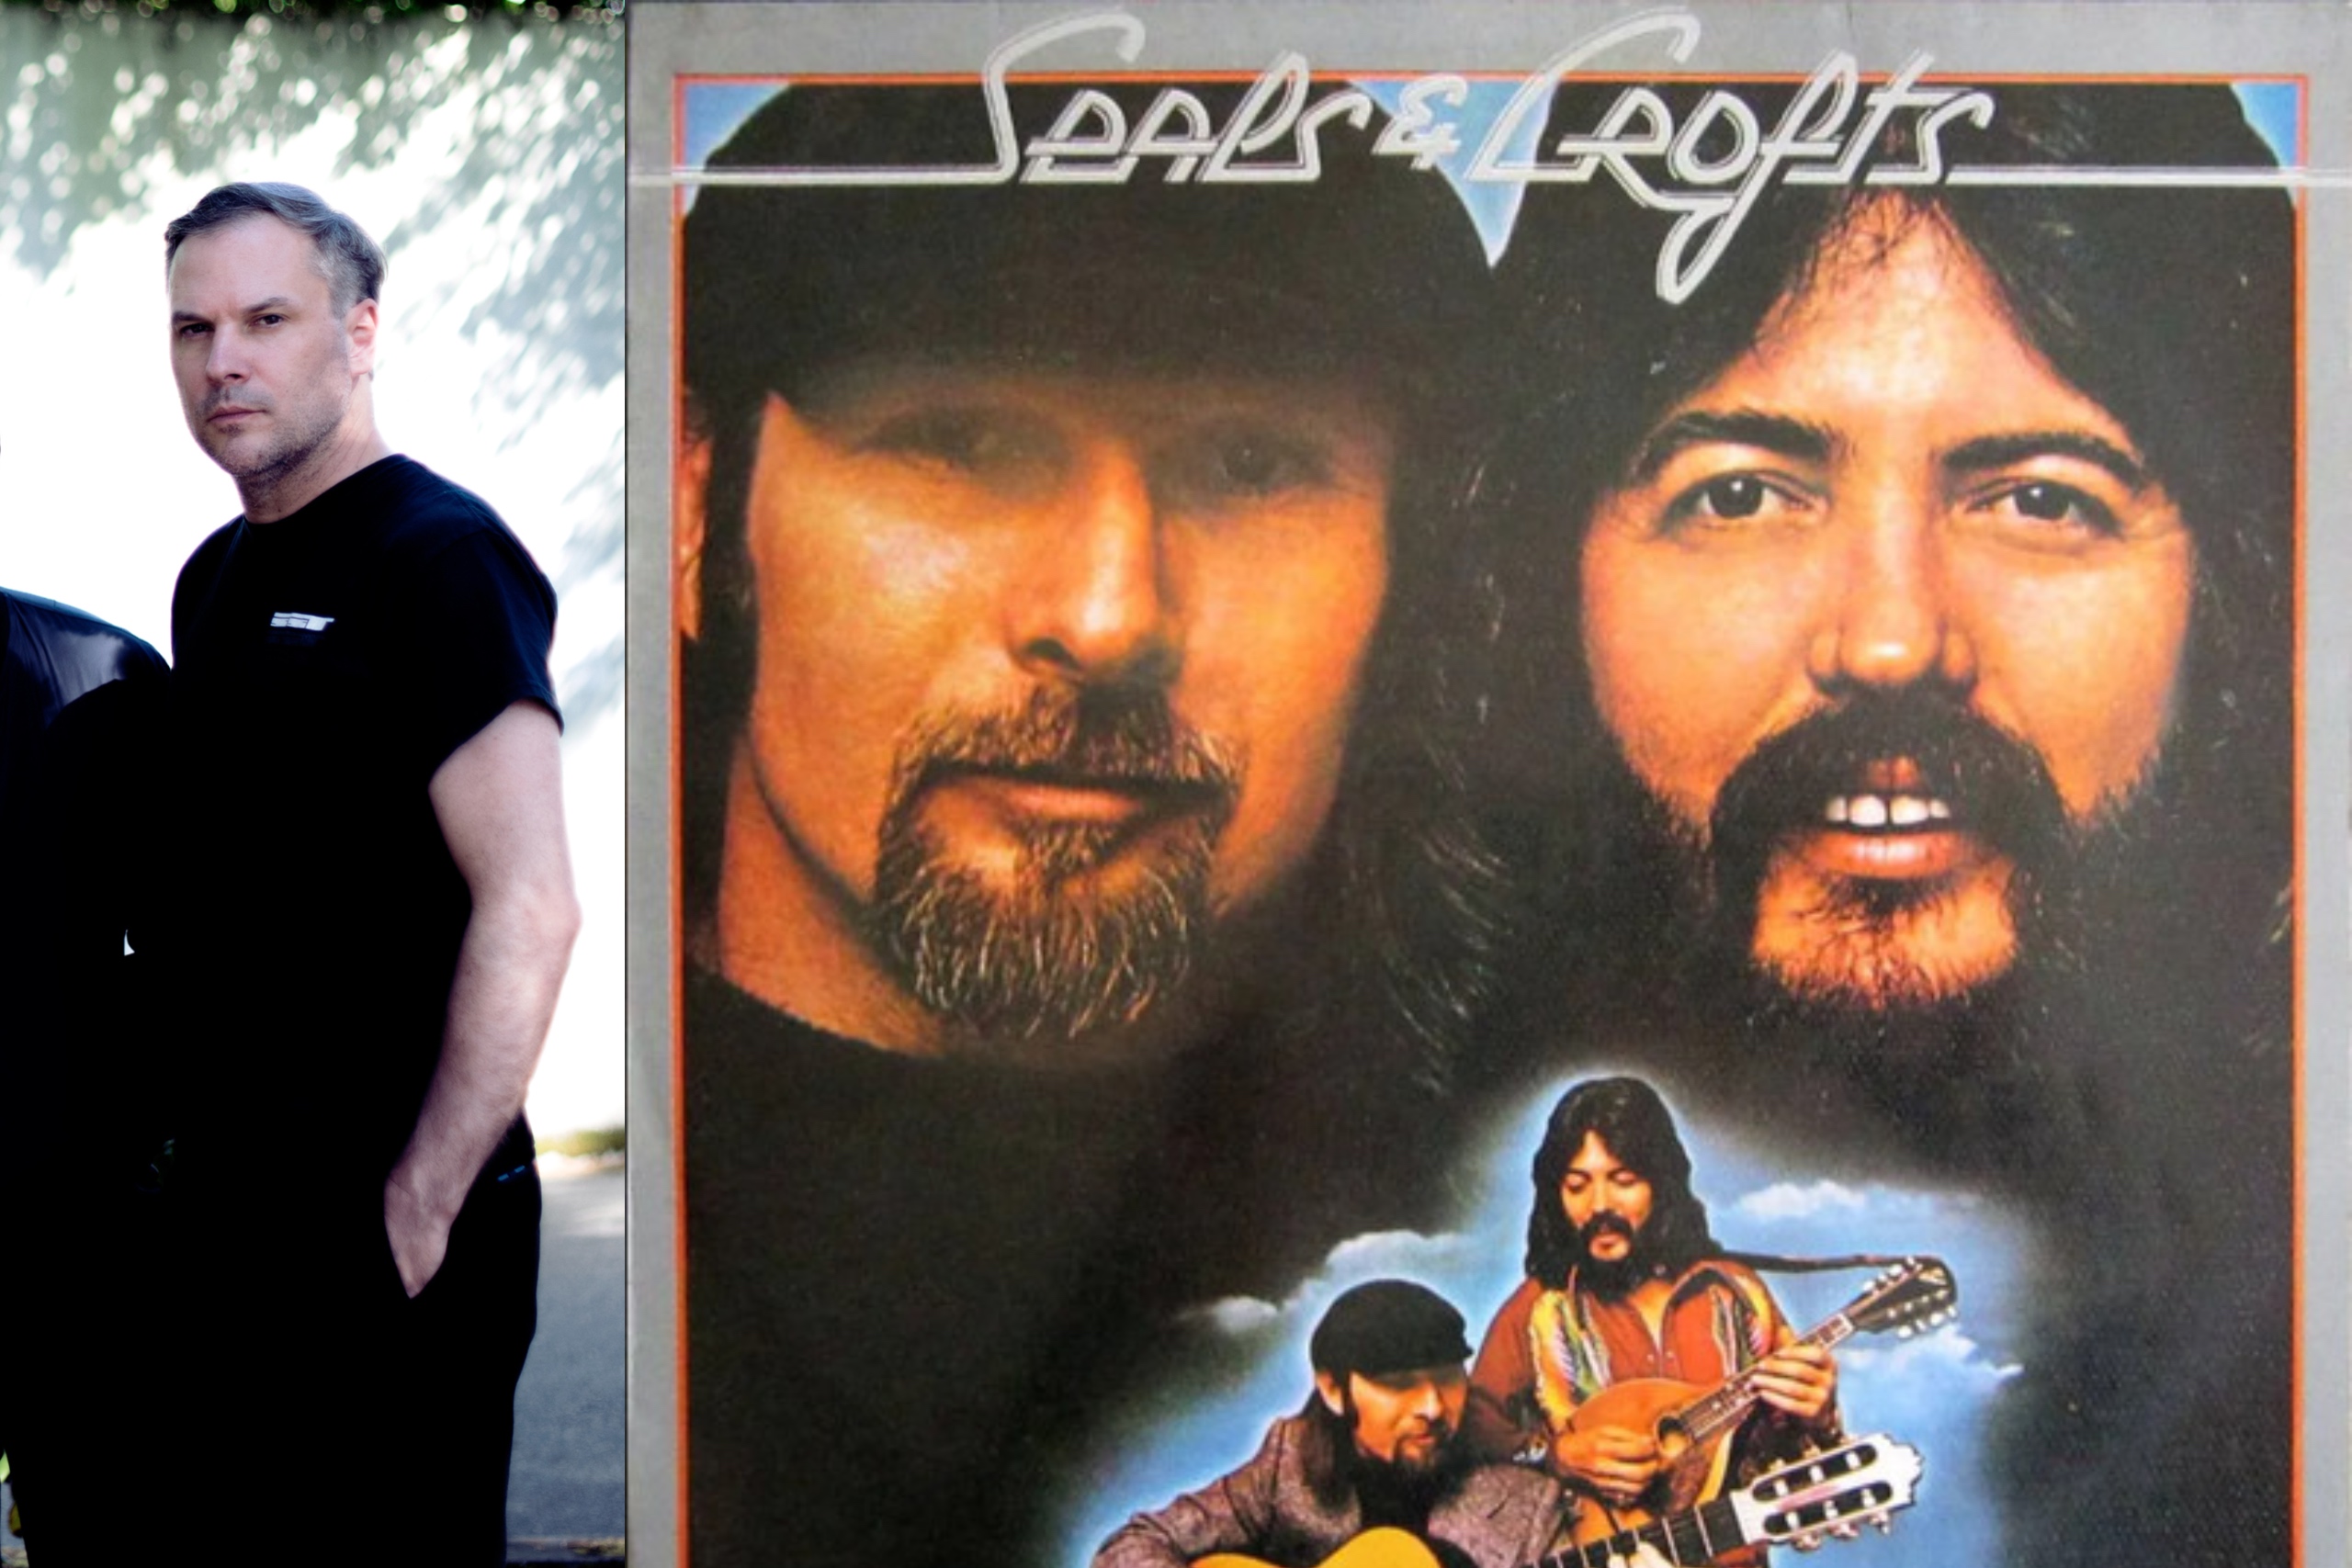 Seals & Crofts - Now Playing [LP] Soft Rock Compilation – Hot Tracks